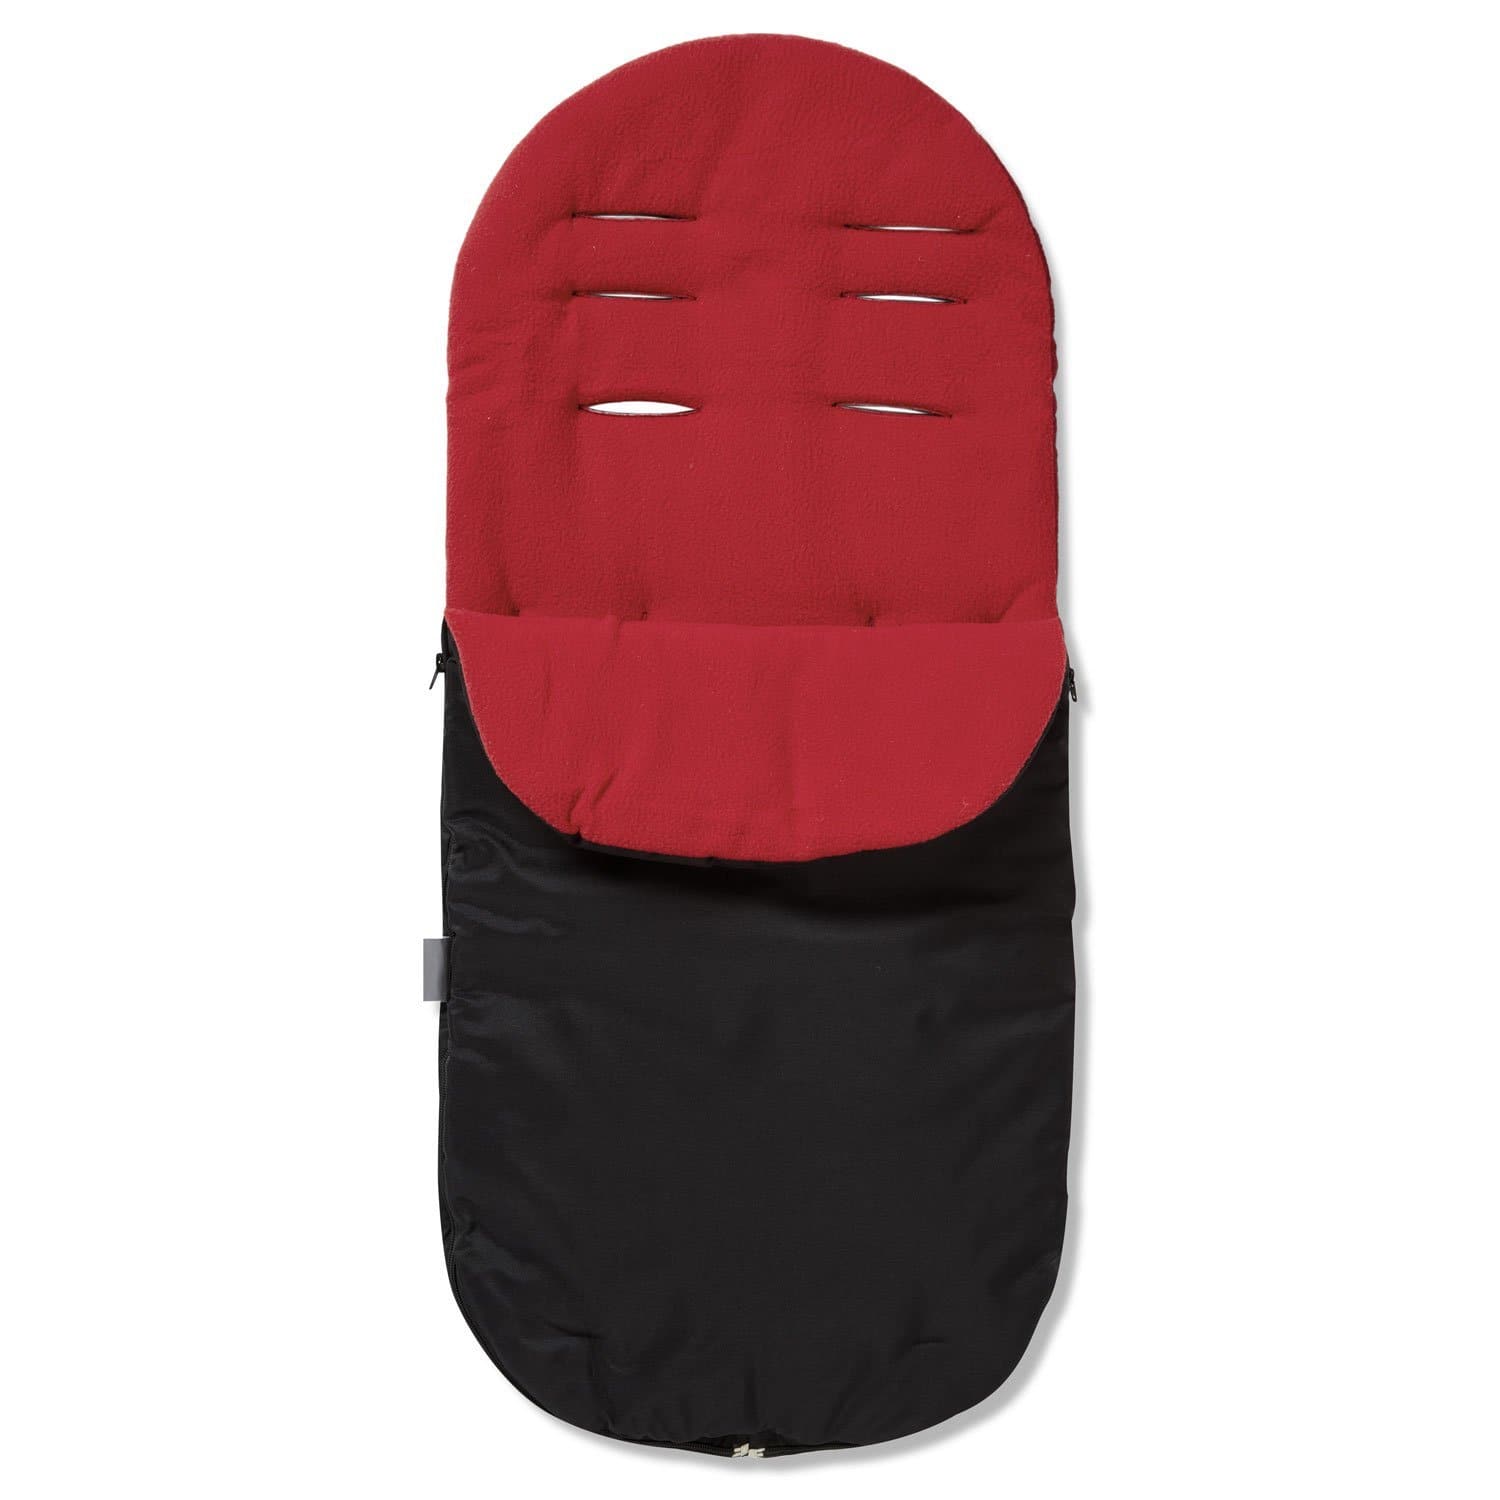 Footmuff / Cosy Toes Compatible with Unilove - Red / Fits All Models | For Your Little One